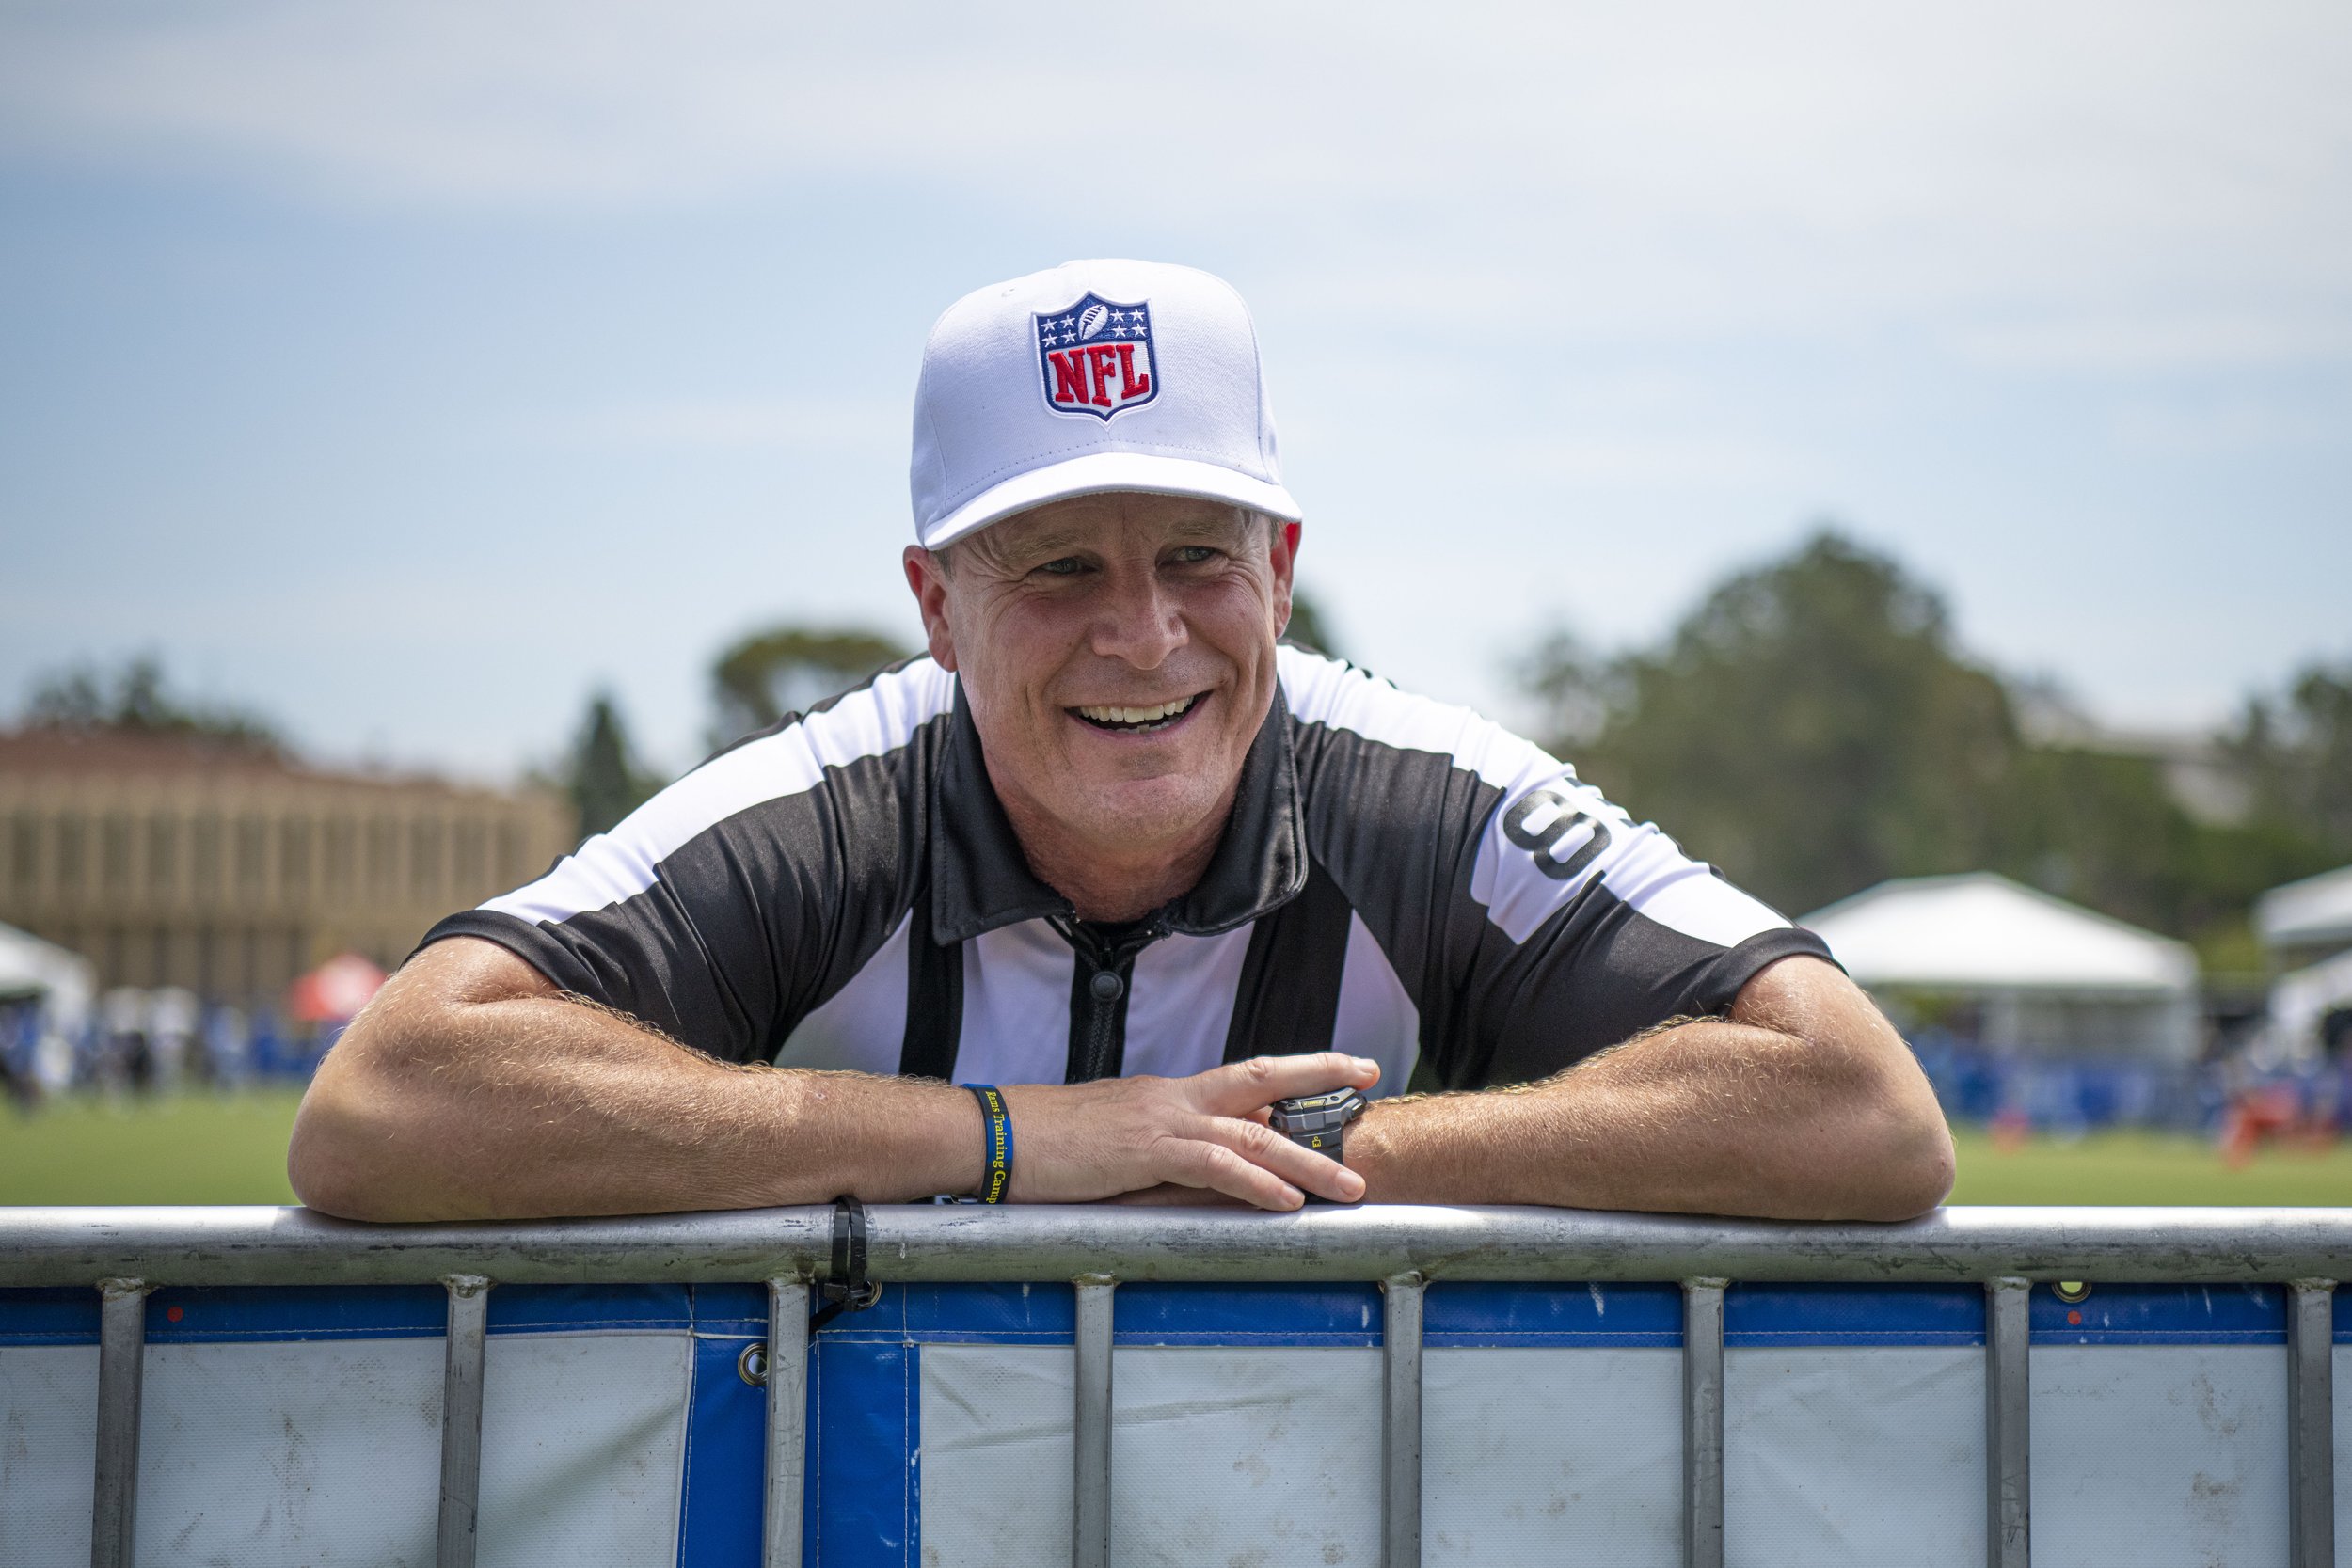  The Head referee for the Rams trainging camp scrimmage chats with fans before the official start to the Rams training camp. (Jon Putman | The Corsair) 